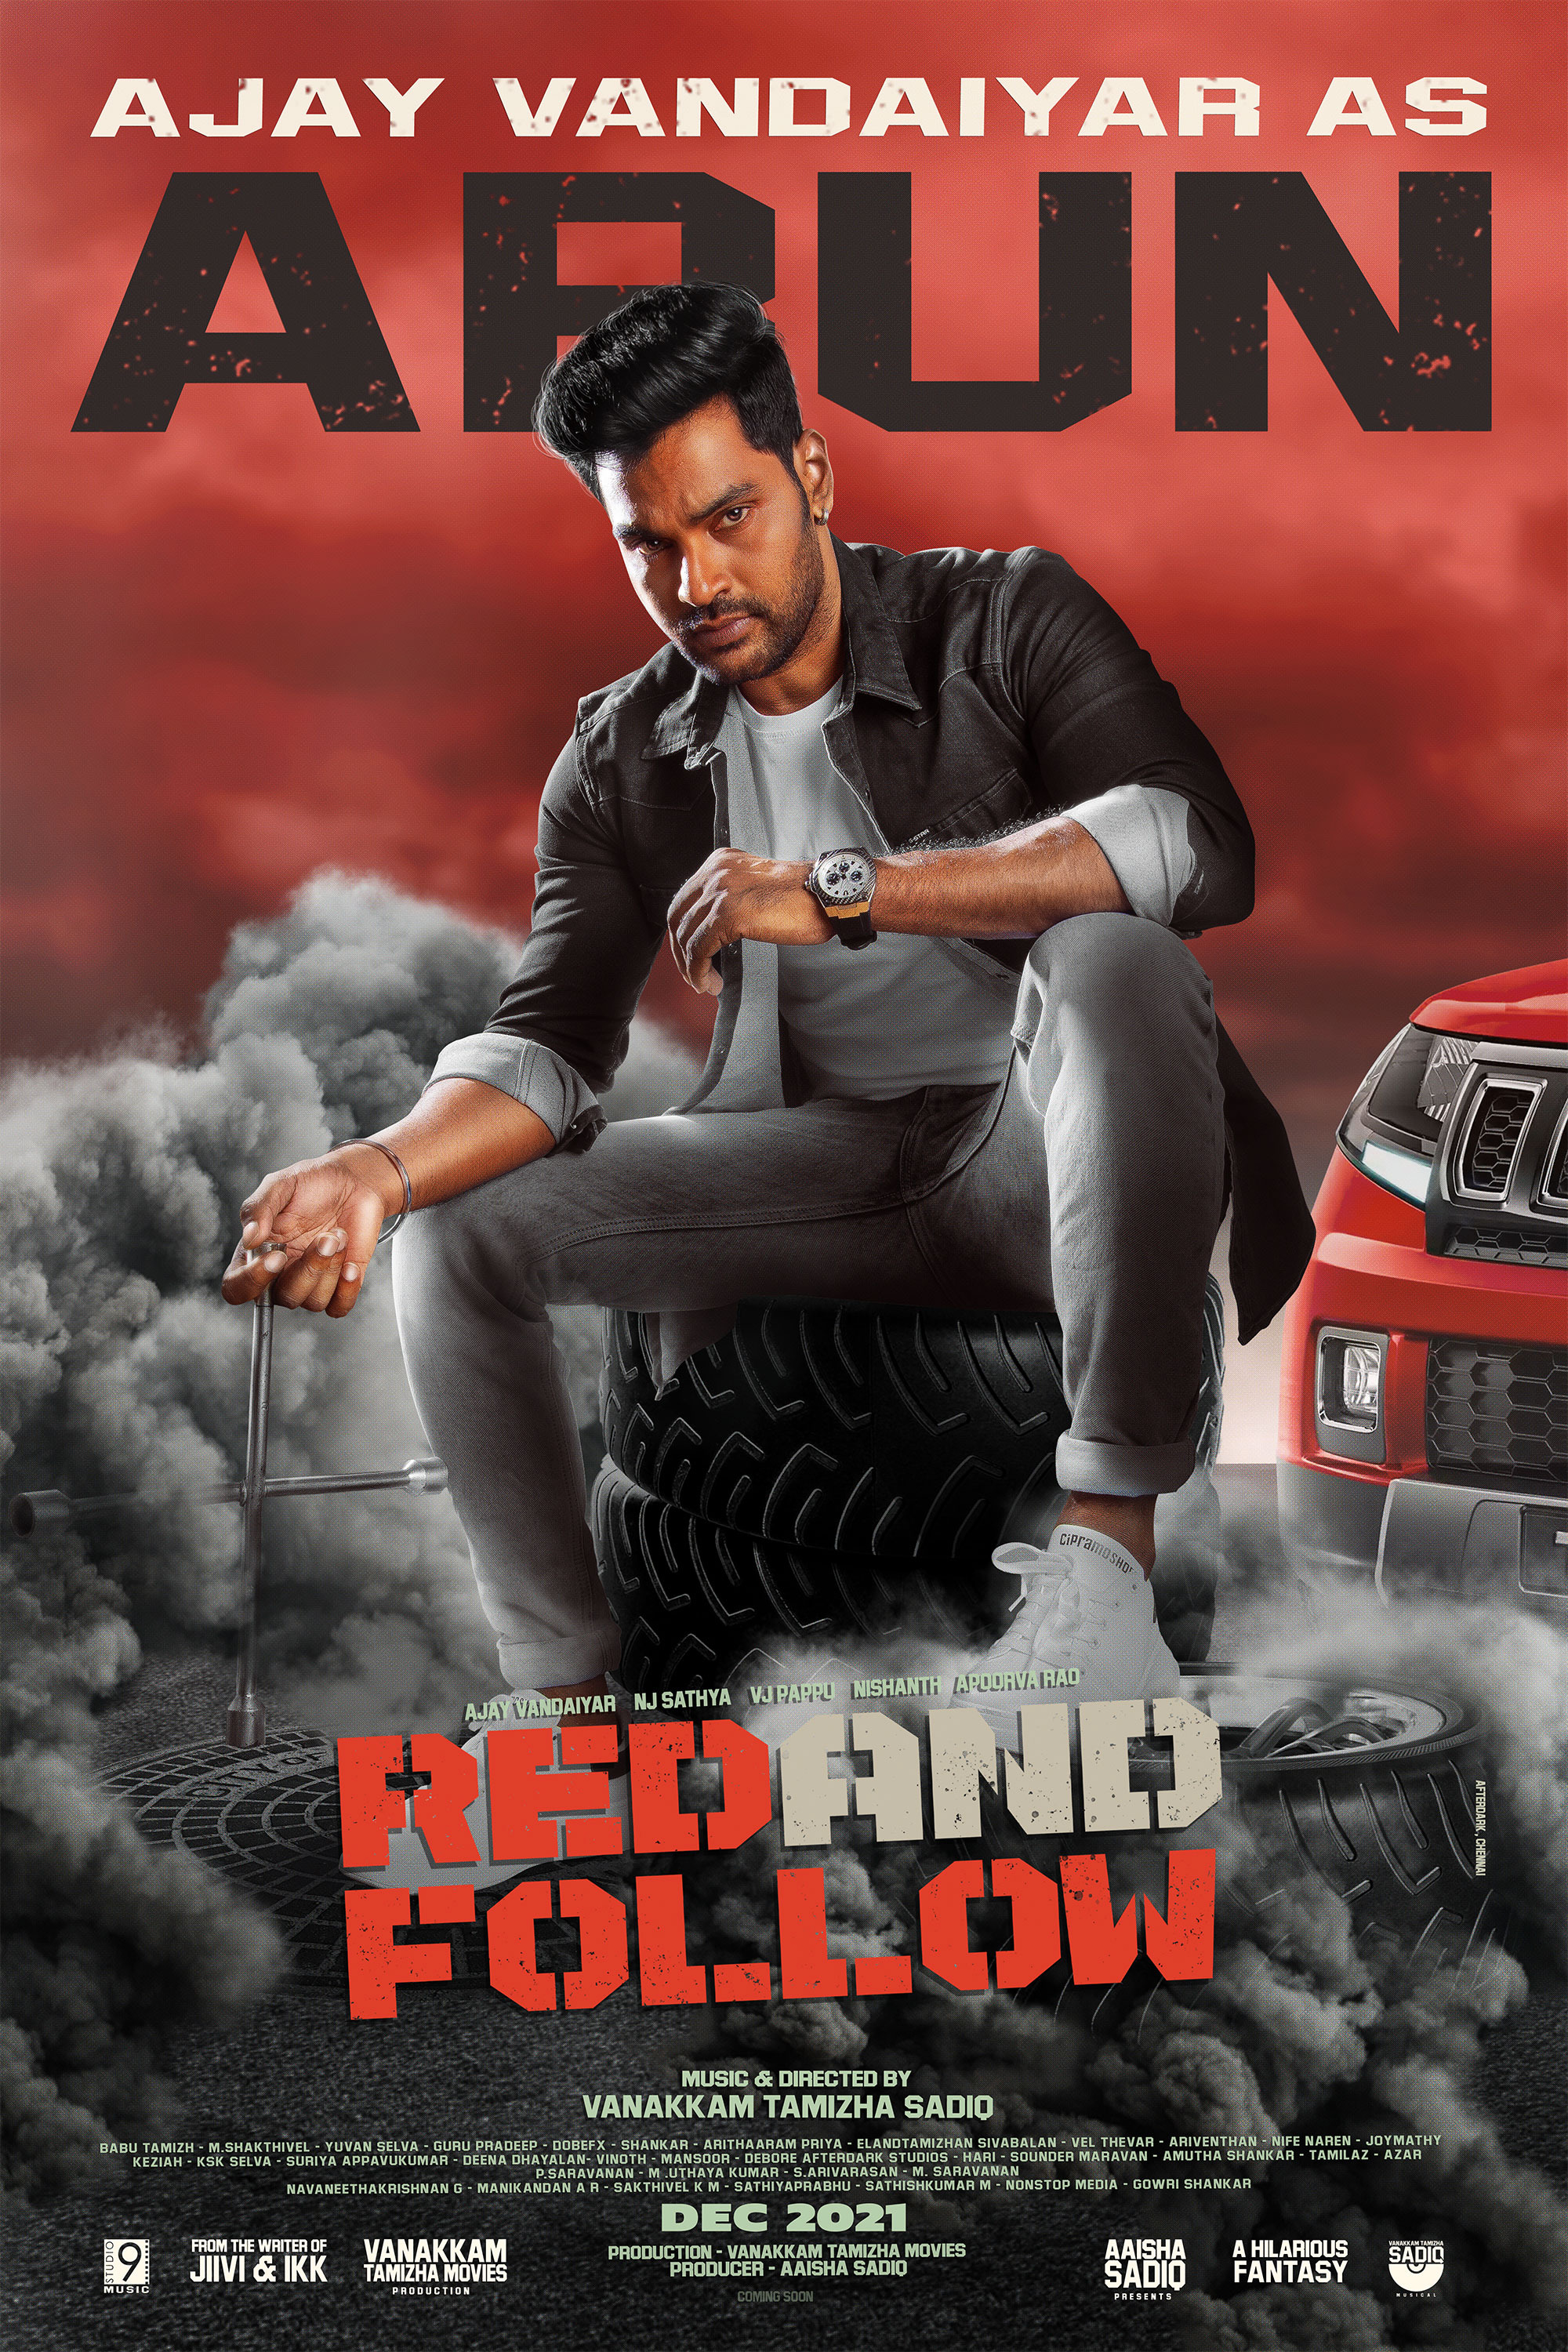 Mega Sized Movie Poster Image for Red and Follow (#5 of 10)